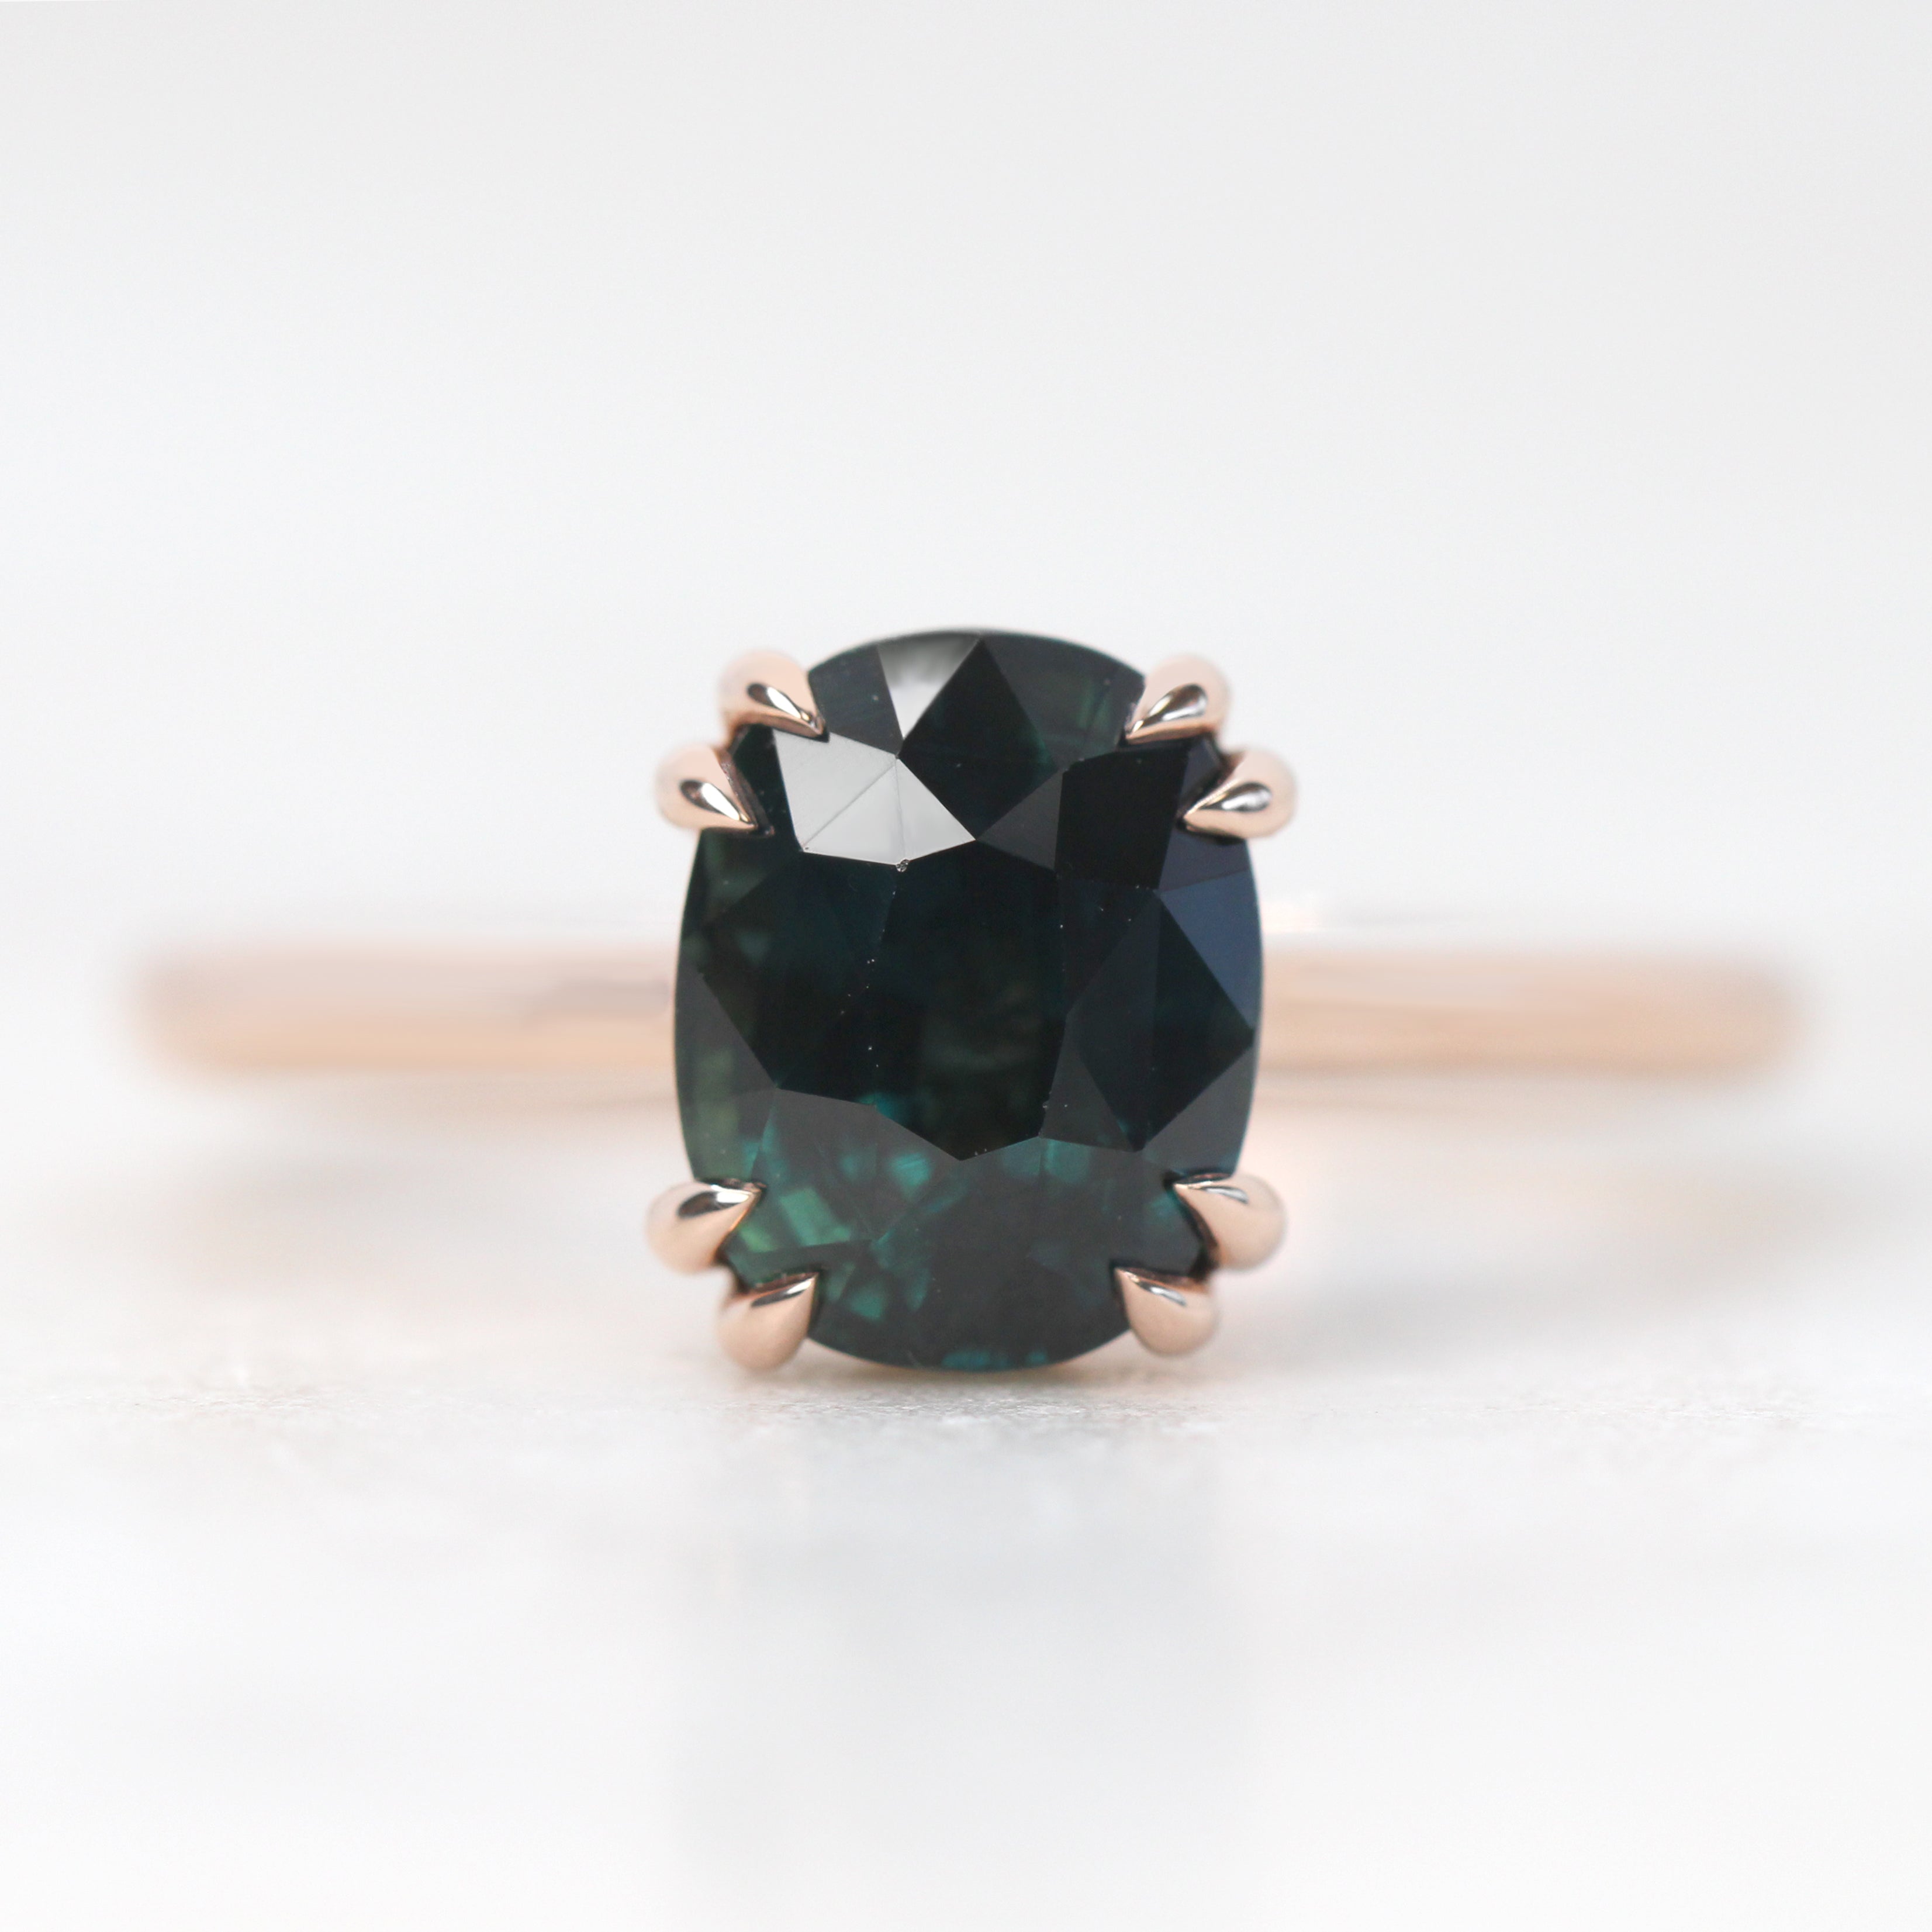 Nesta Ring with a 3.05 Carat Dark Teal Oval Sapphire in 14k Rose Gold - Ready to Size and Ship - Midwinter Co. Alternative Bridal Rings and Modern Fine Jewelry